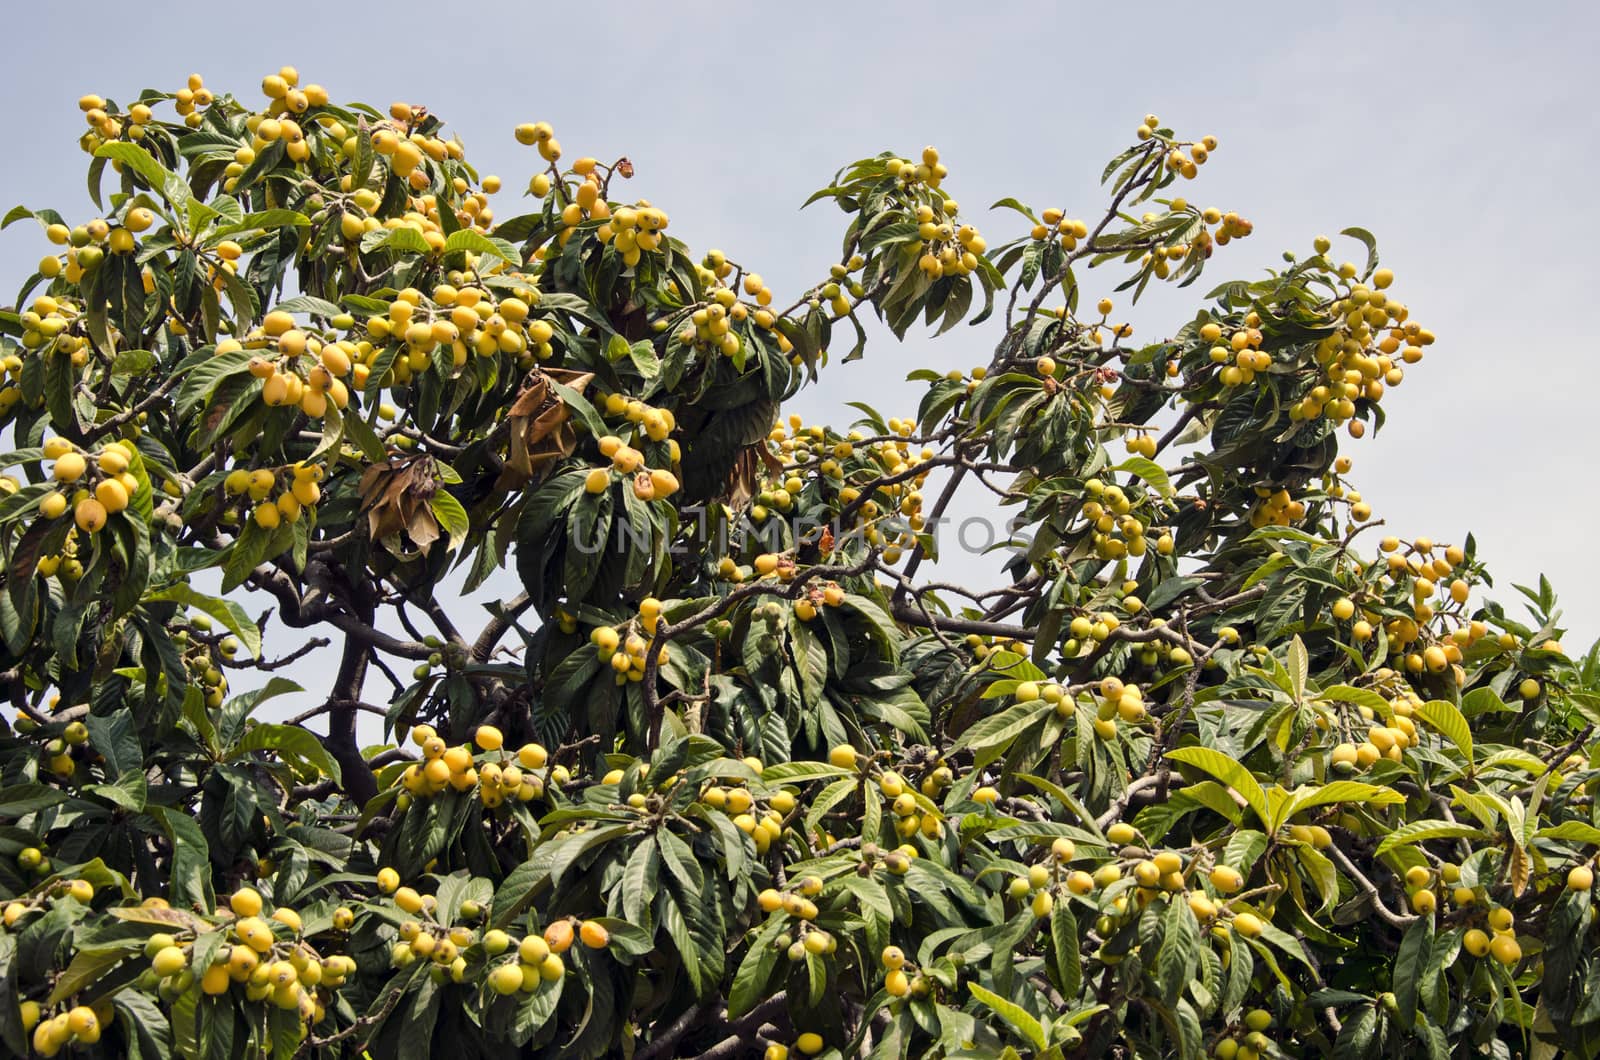 Exotic plant tree with ripe fruit growing in Greece